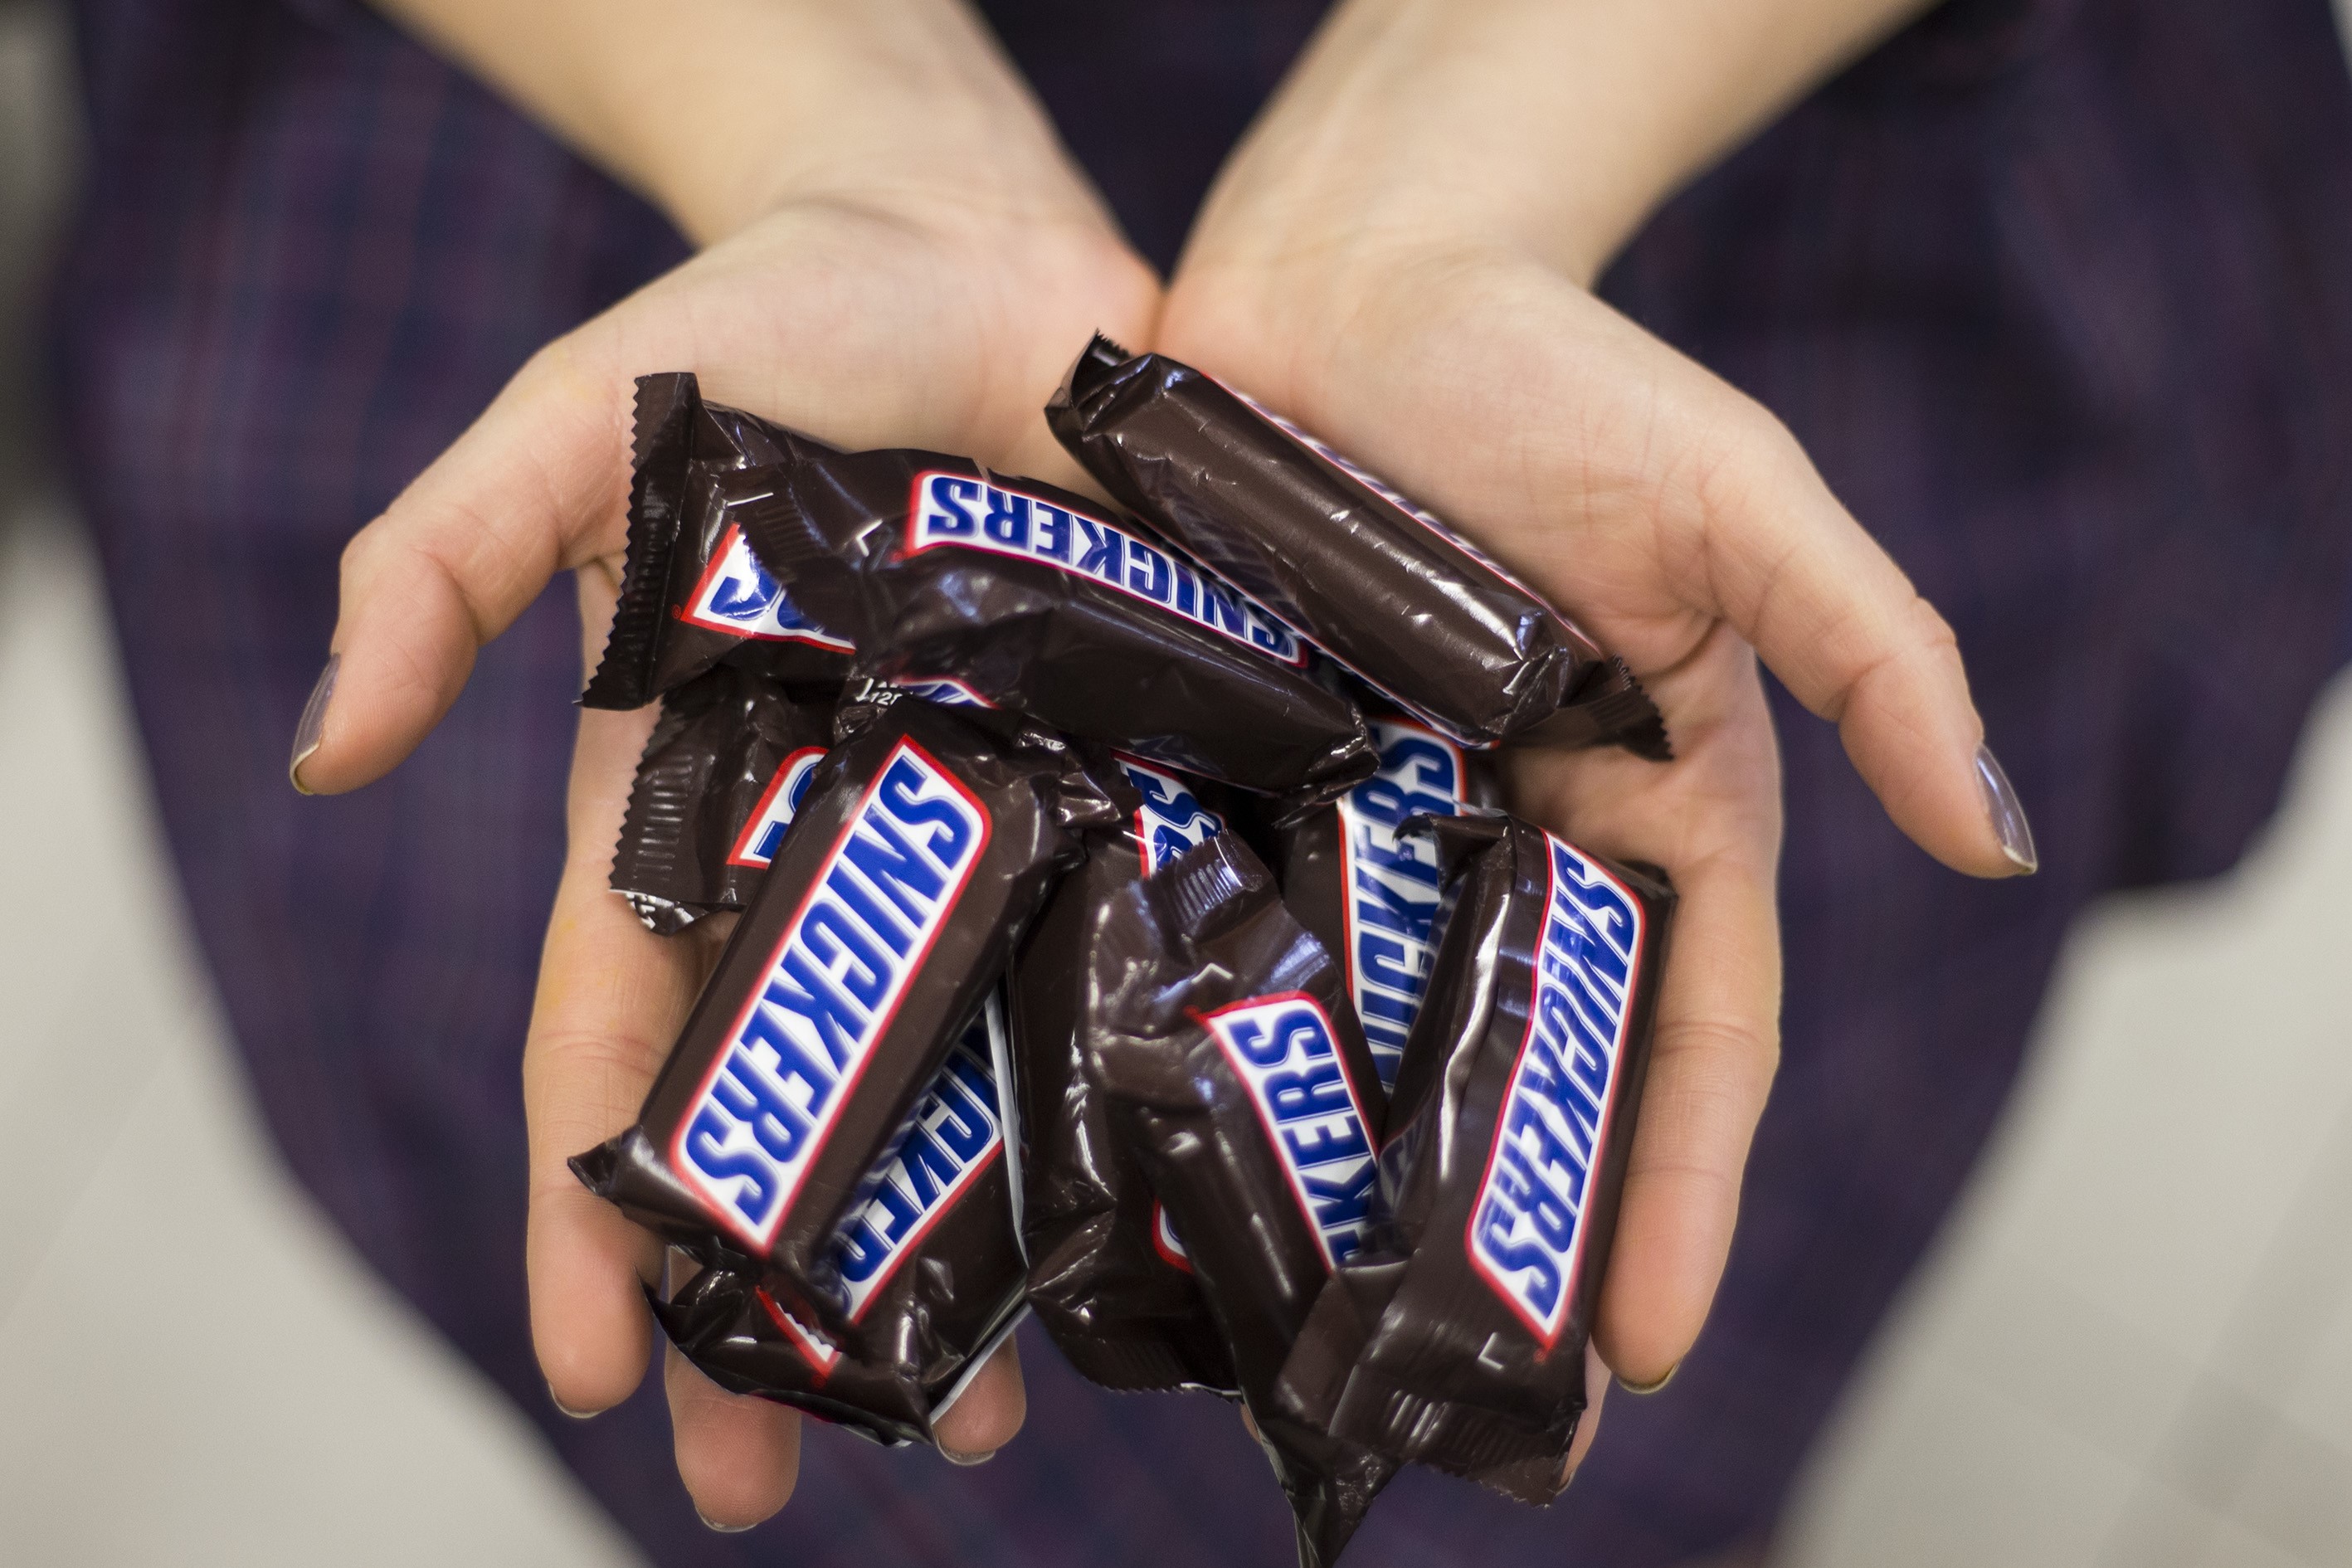 Snickers Is Giving Away 1 Million Candy Bars. Here's How You Can Score a Free Bag